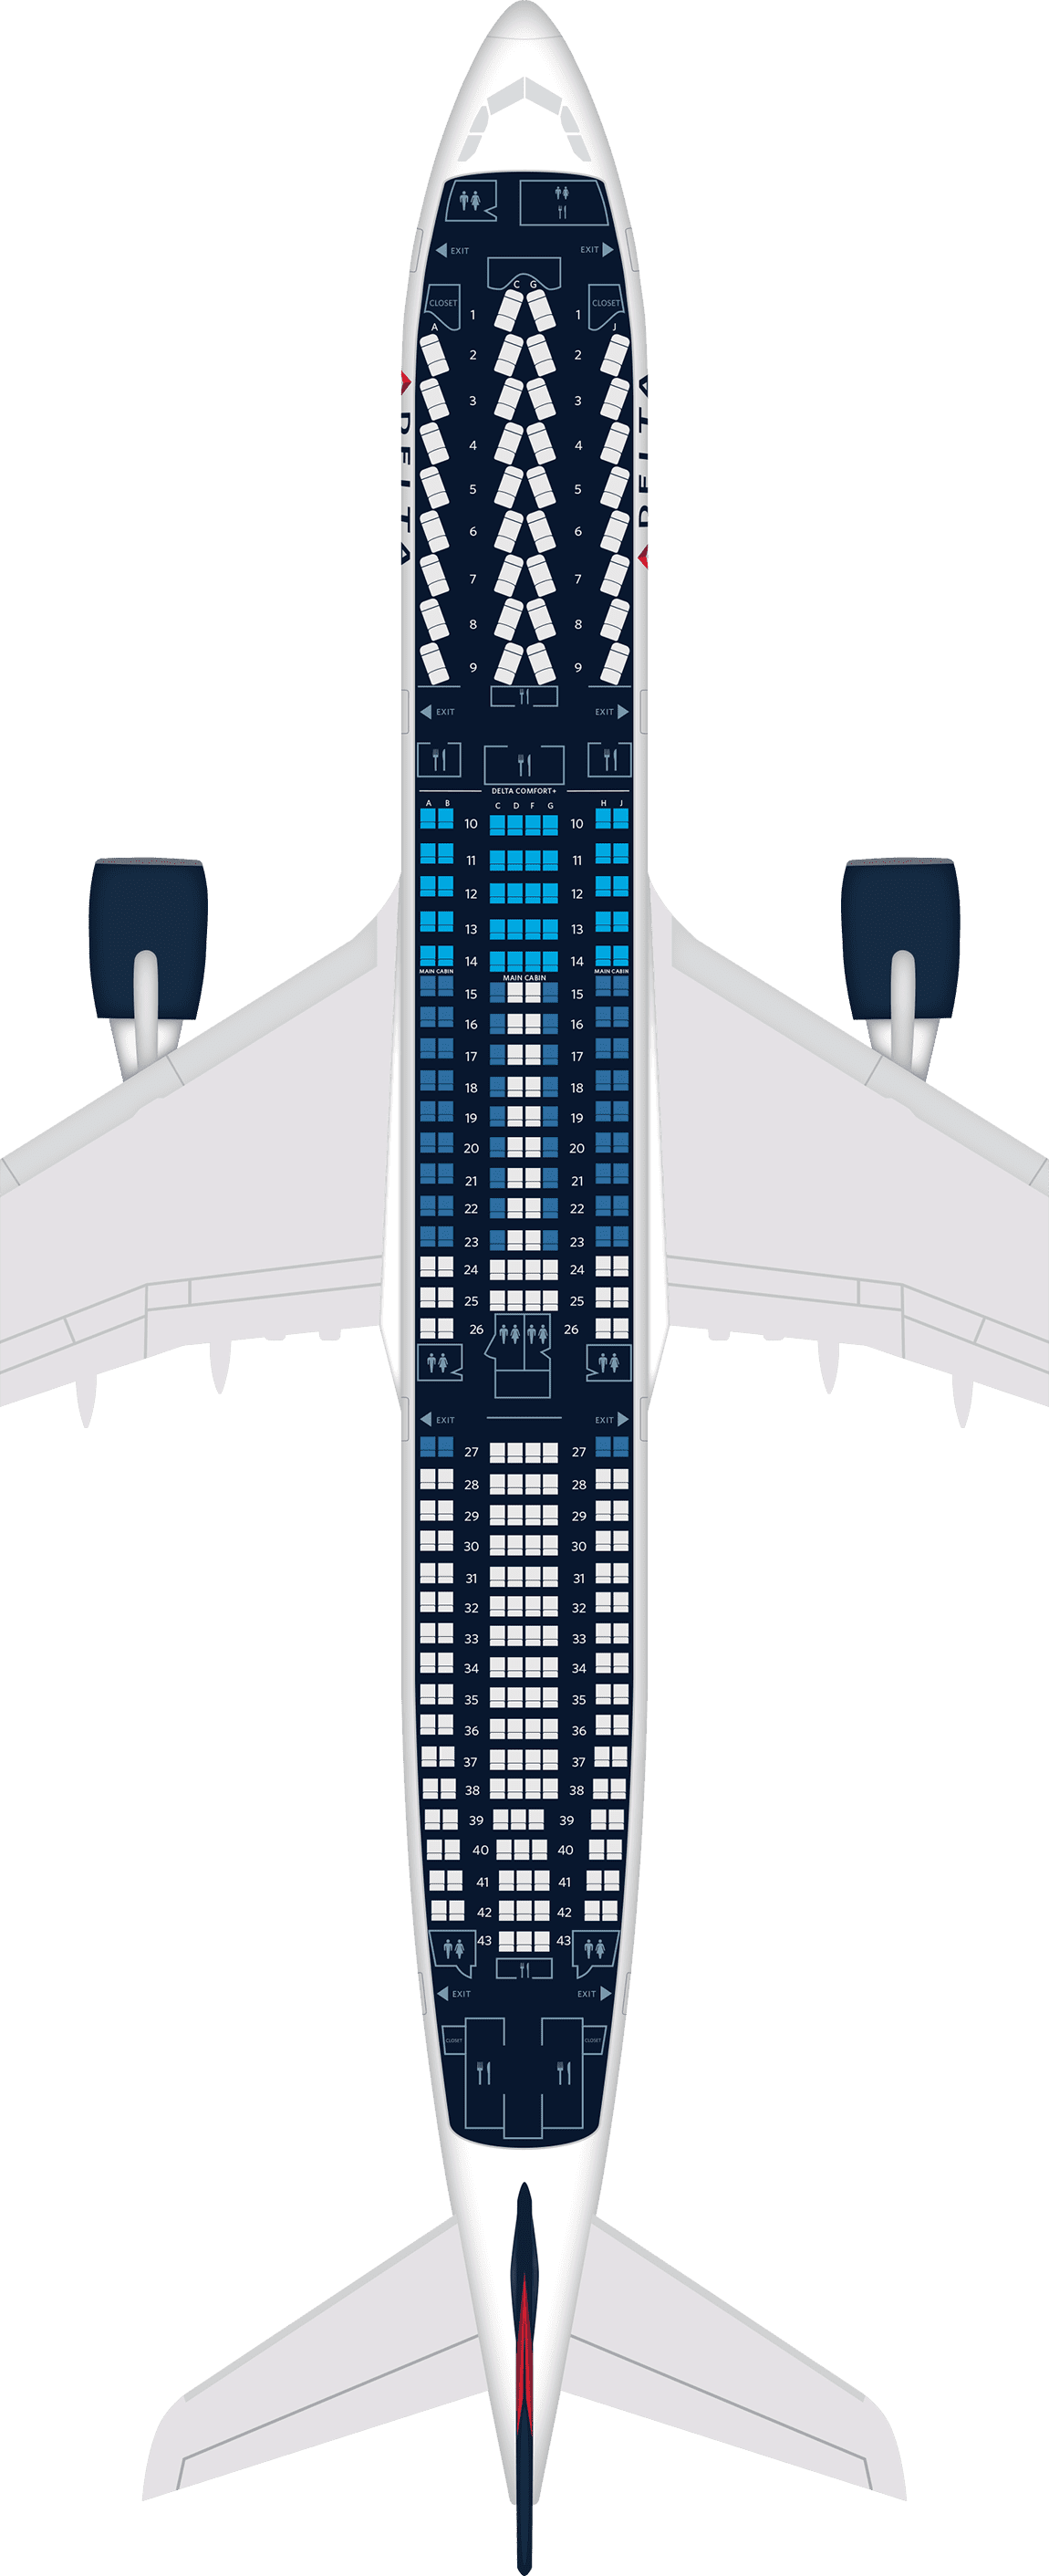 Airbus A330 300 Aircraft Seat Maps Specs And Amenities Delta Air Lines